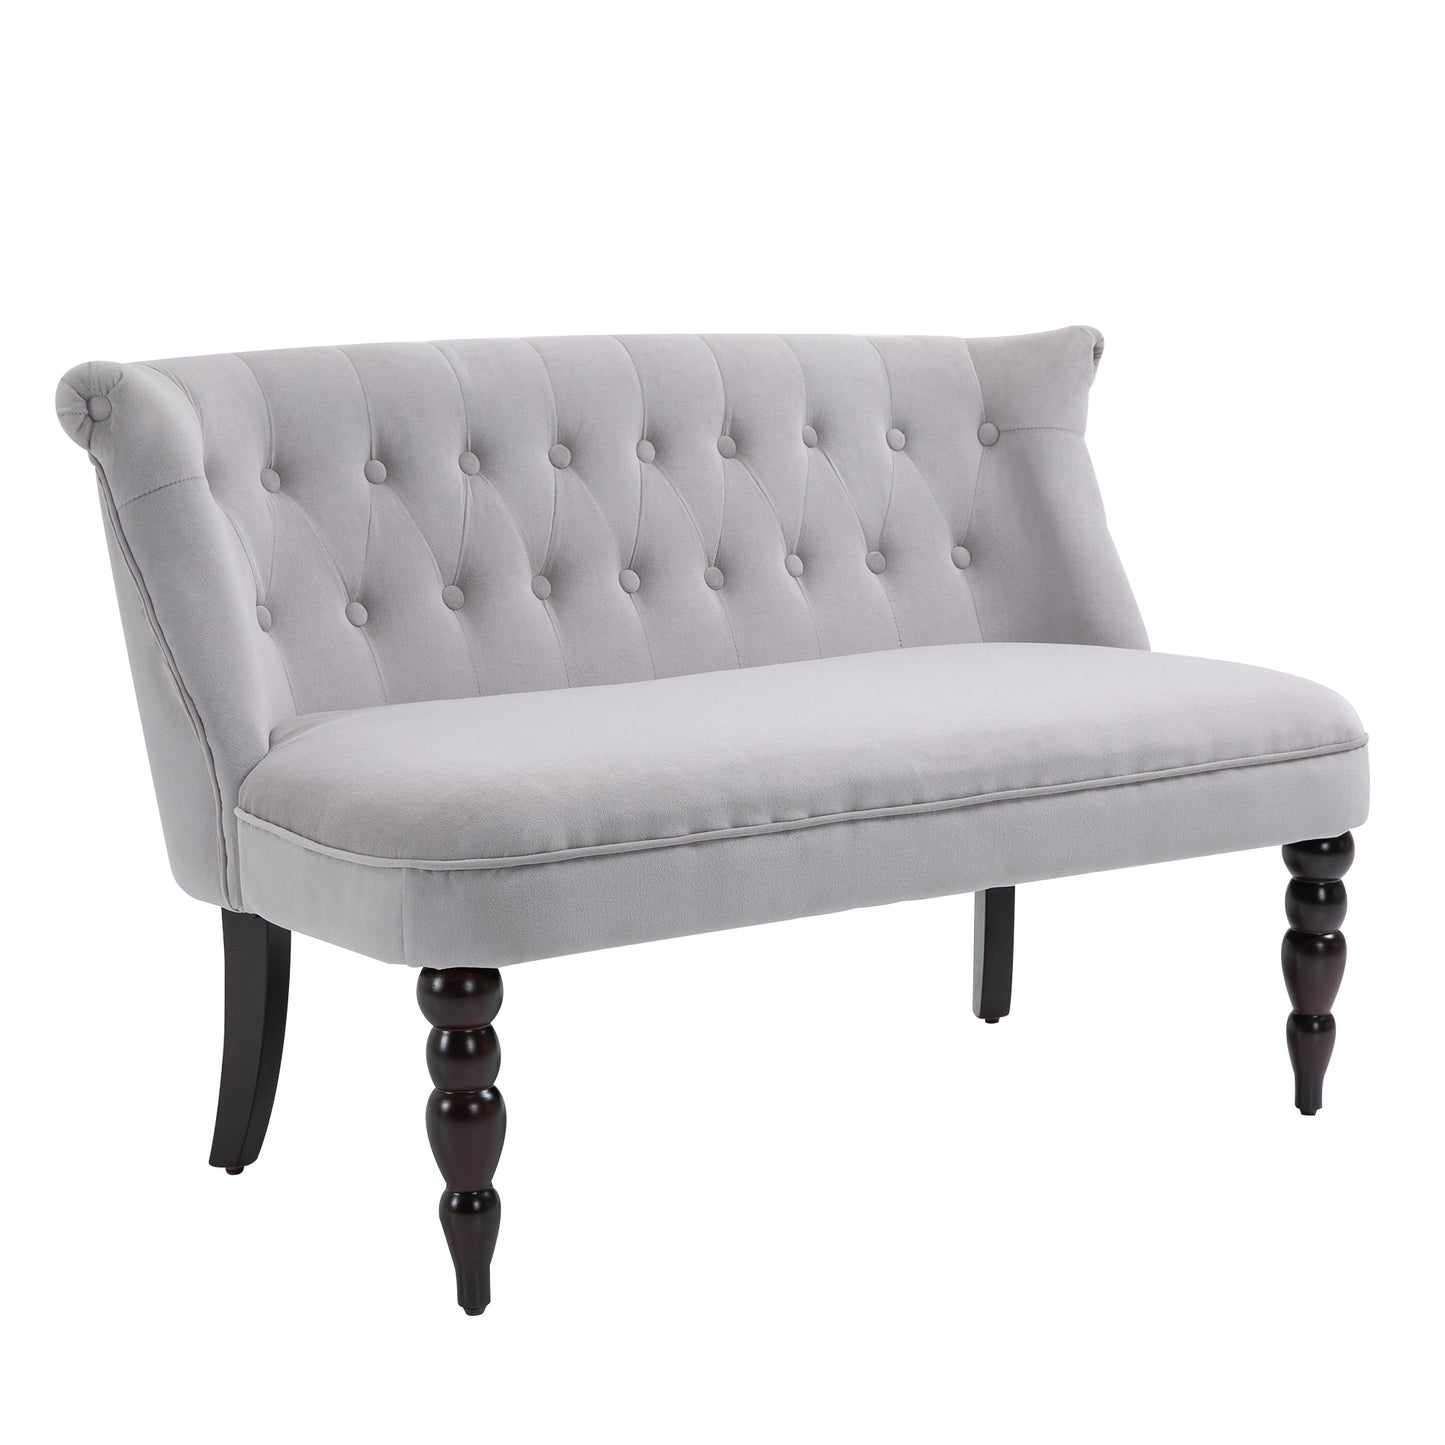 HOMCOM Vintage Armless Button-Tufted Fabric Loveseat 2 Seat Sofa Couch